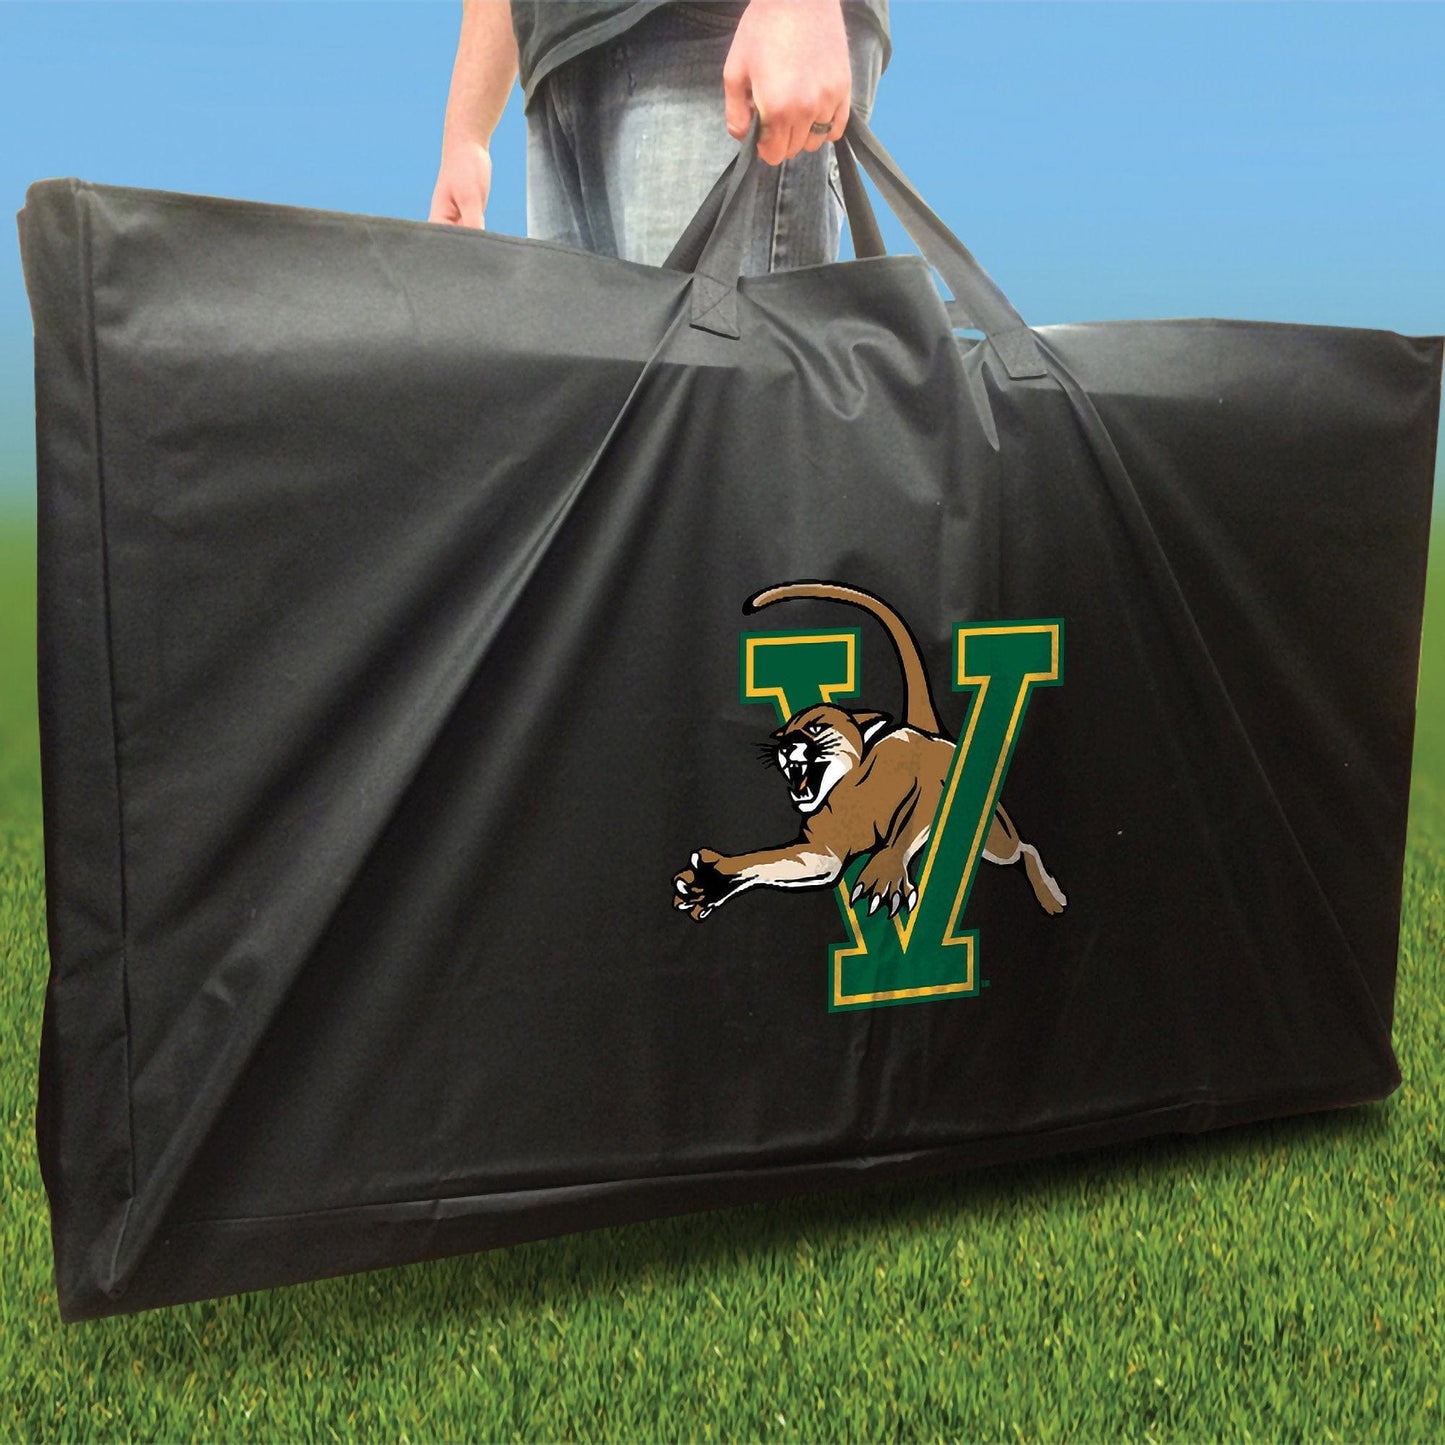 Vermont Catamounts Stained Pyramid team logo carrying case